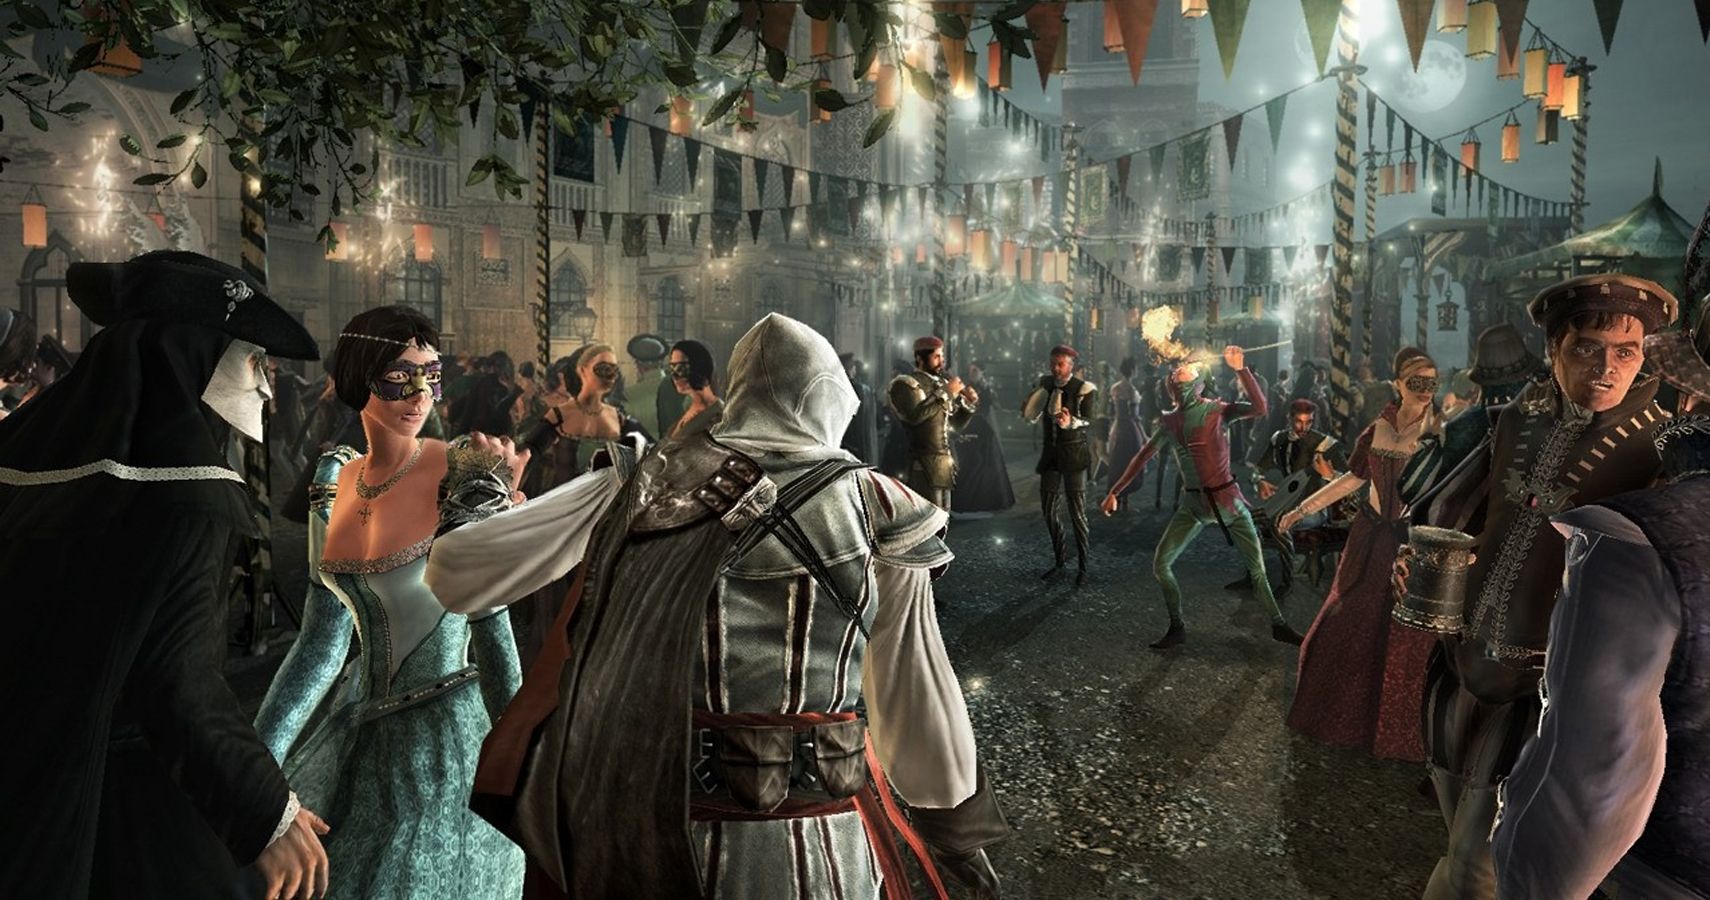 Assassin's Creed 2 will be free on PC this week - Polygon